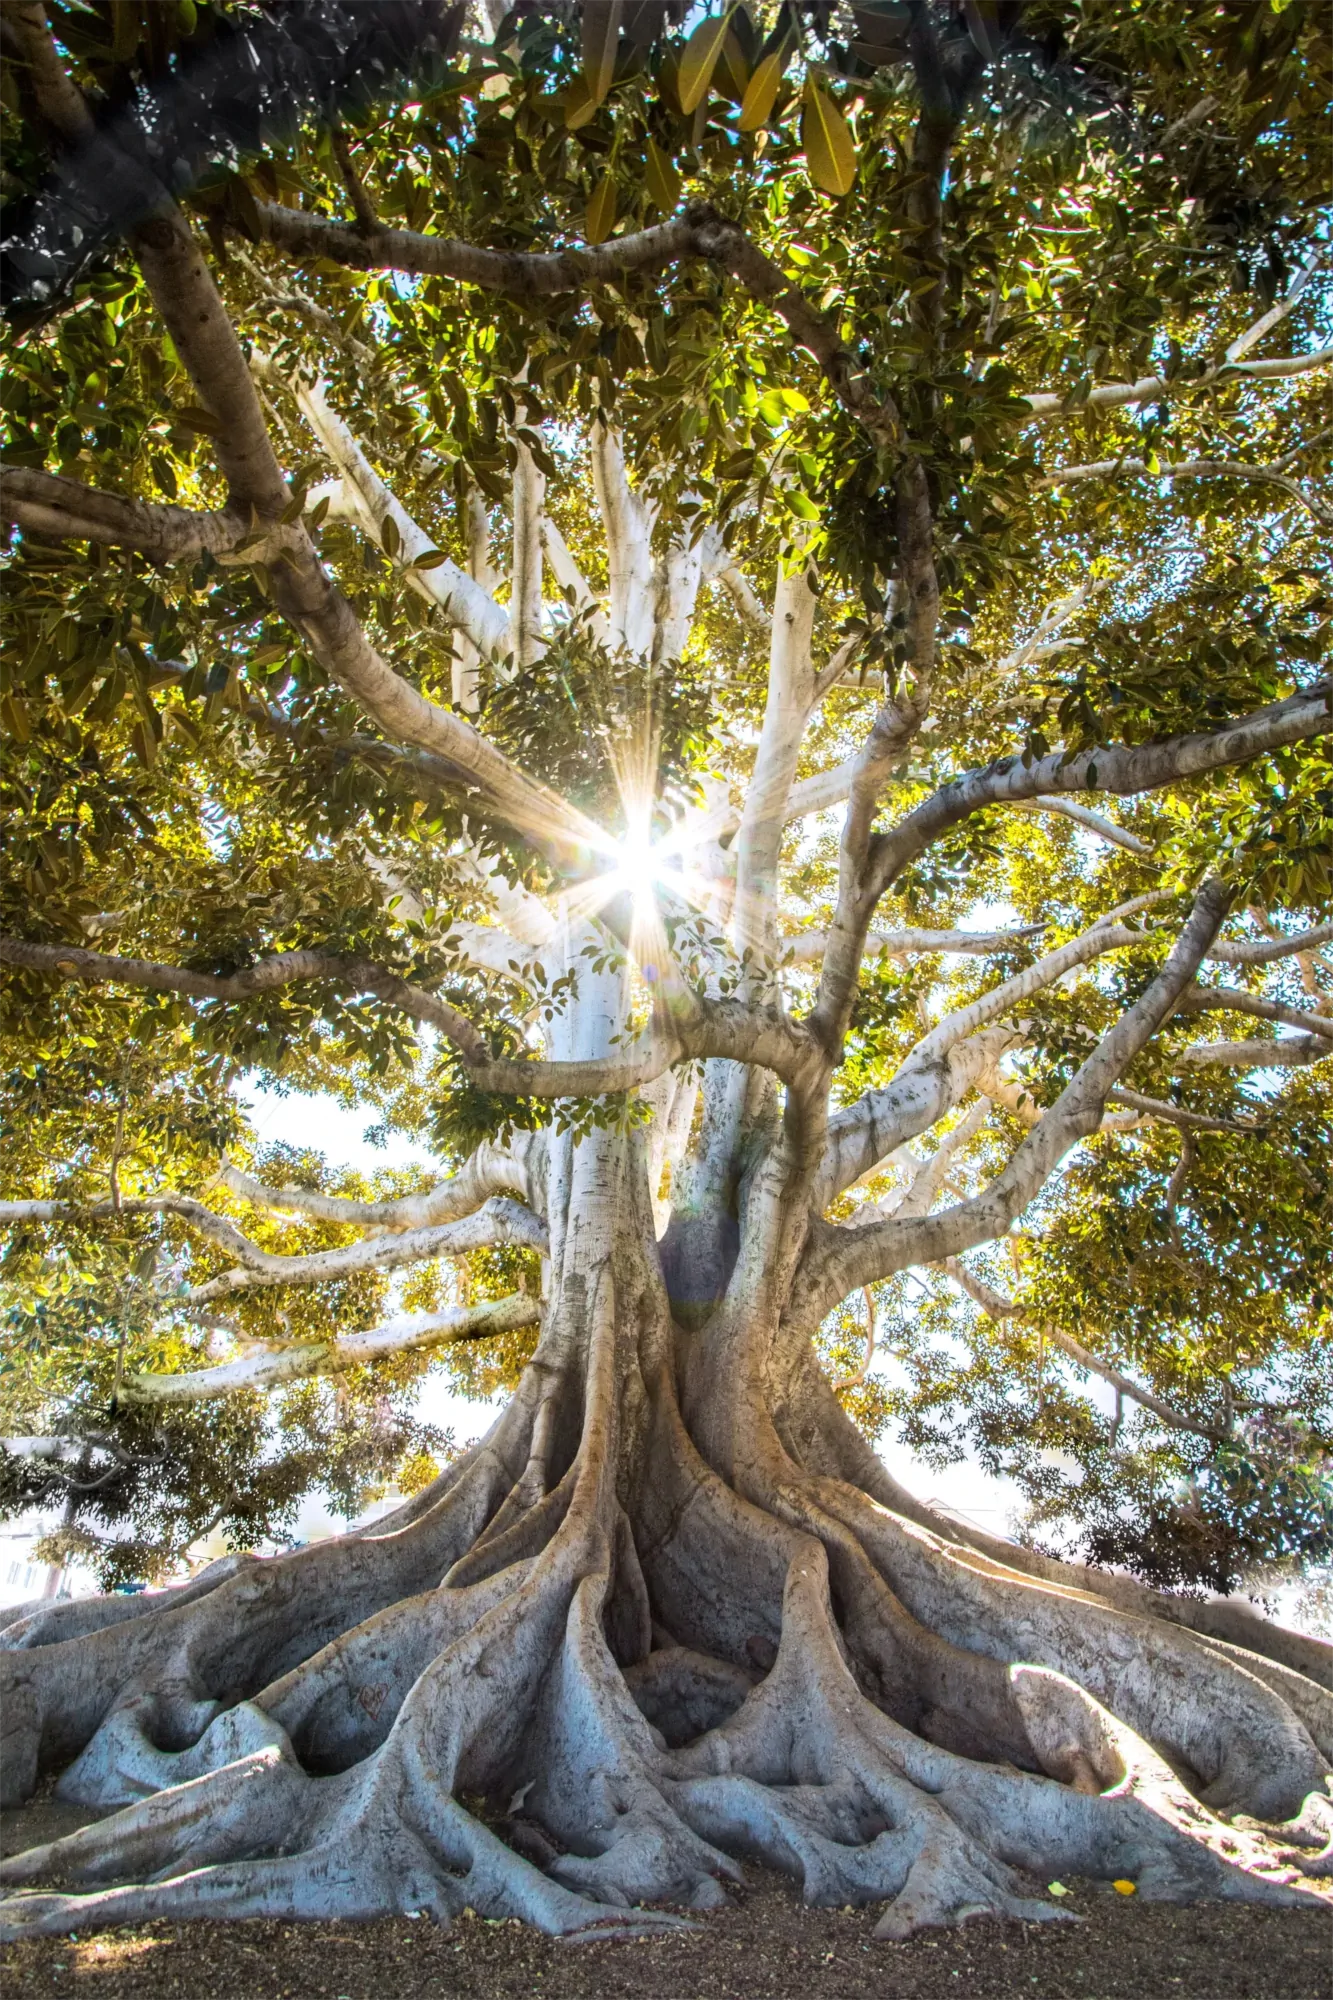 Photograph of an old tree with sun rays in the center of the image.